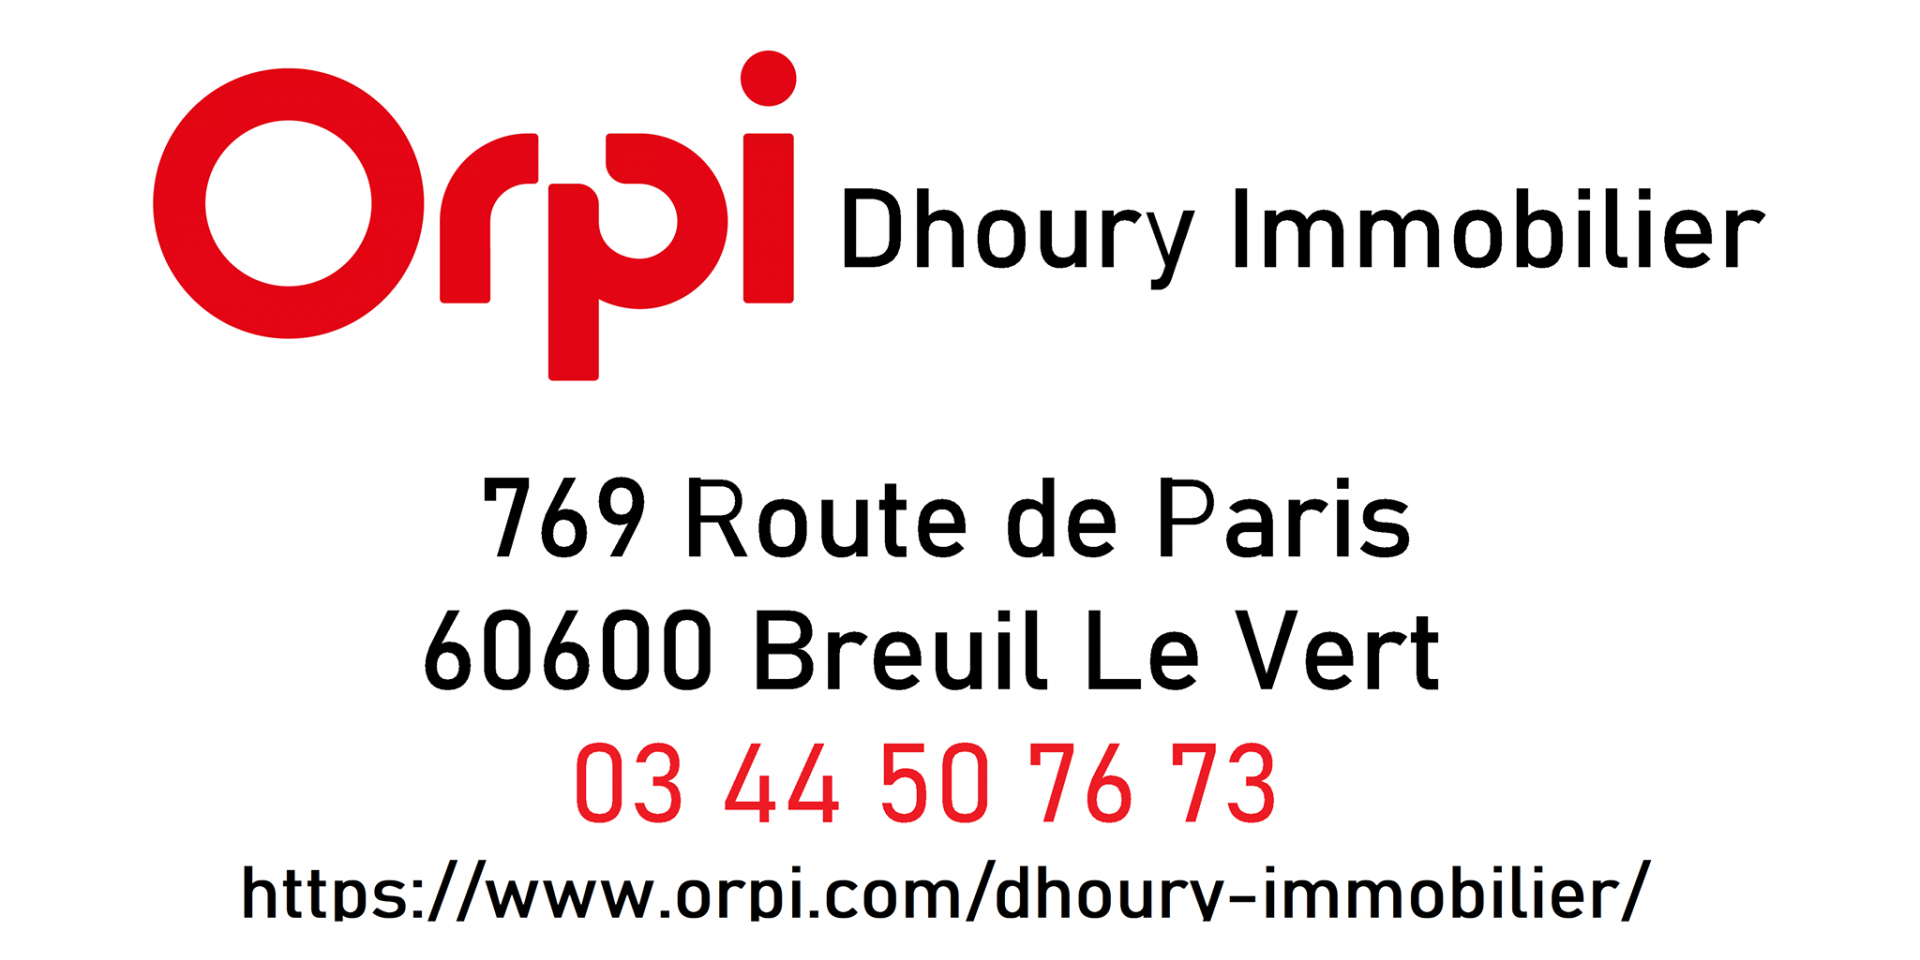 Orpi Dhoury Immobilier